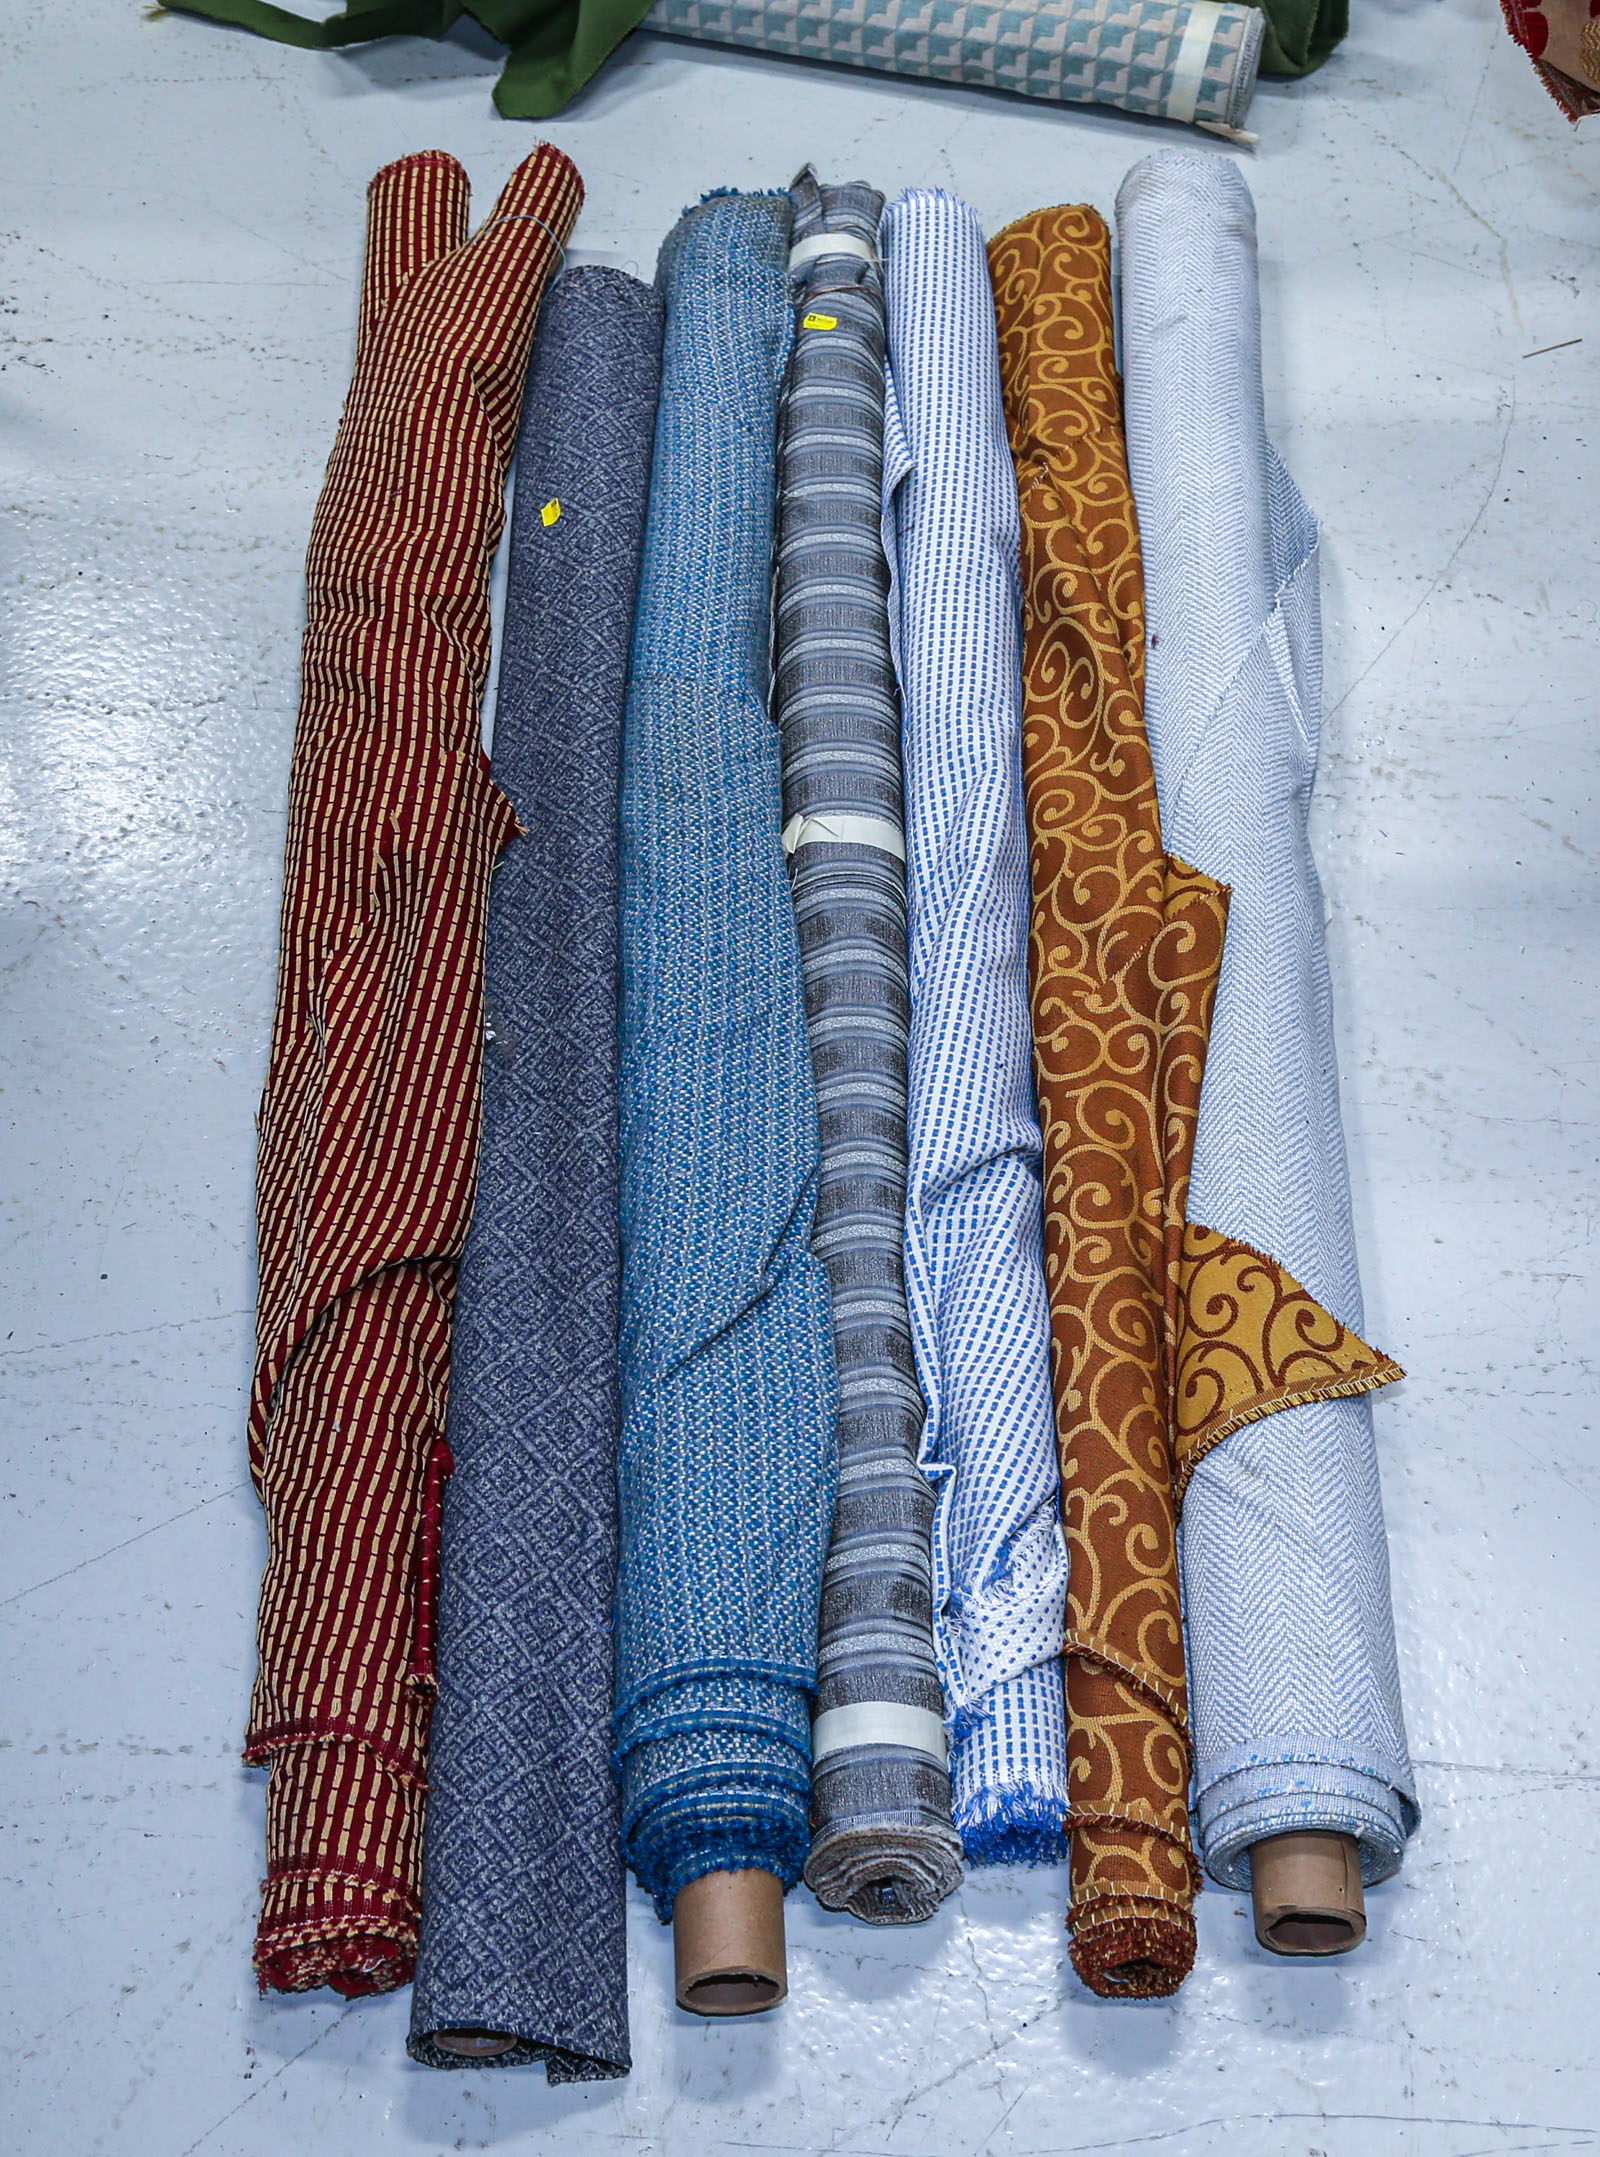 SEVEN BOLTS OF UPHOLSTERY FABRIC